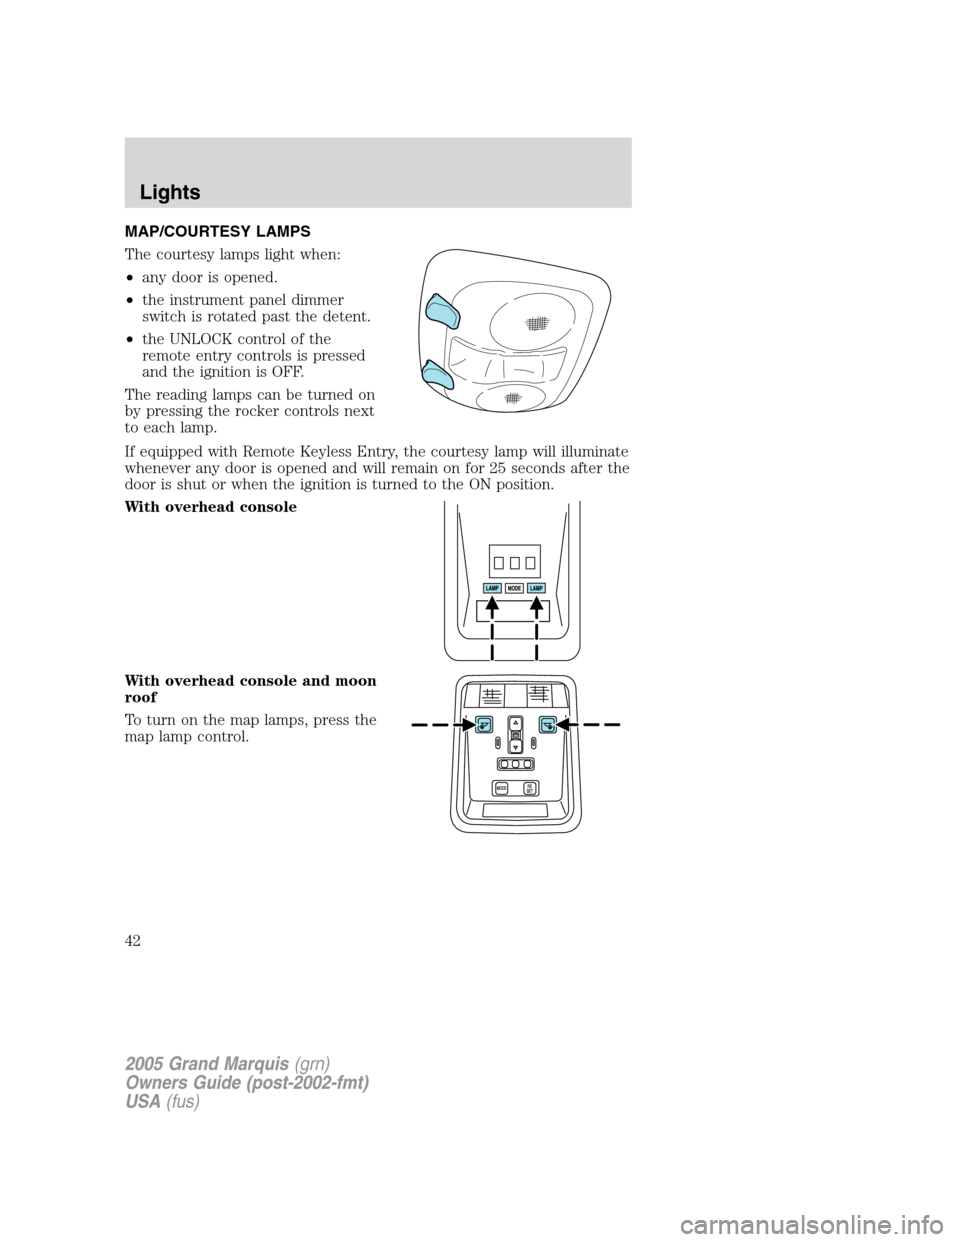 Mercury Grand Marquis 2005  s Service Manual MAP/COURTESY LAMPS
The courtesy lamps light when:
•any door is opened.
•the instrument panel dimmer
switch is rotated past the detent.
•the UNLOCK control of the
remote entry controls is pressed